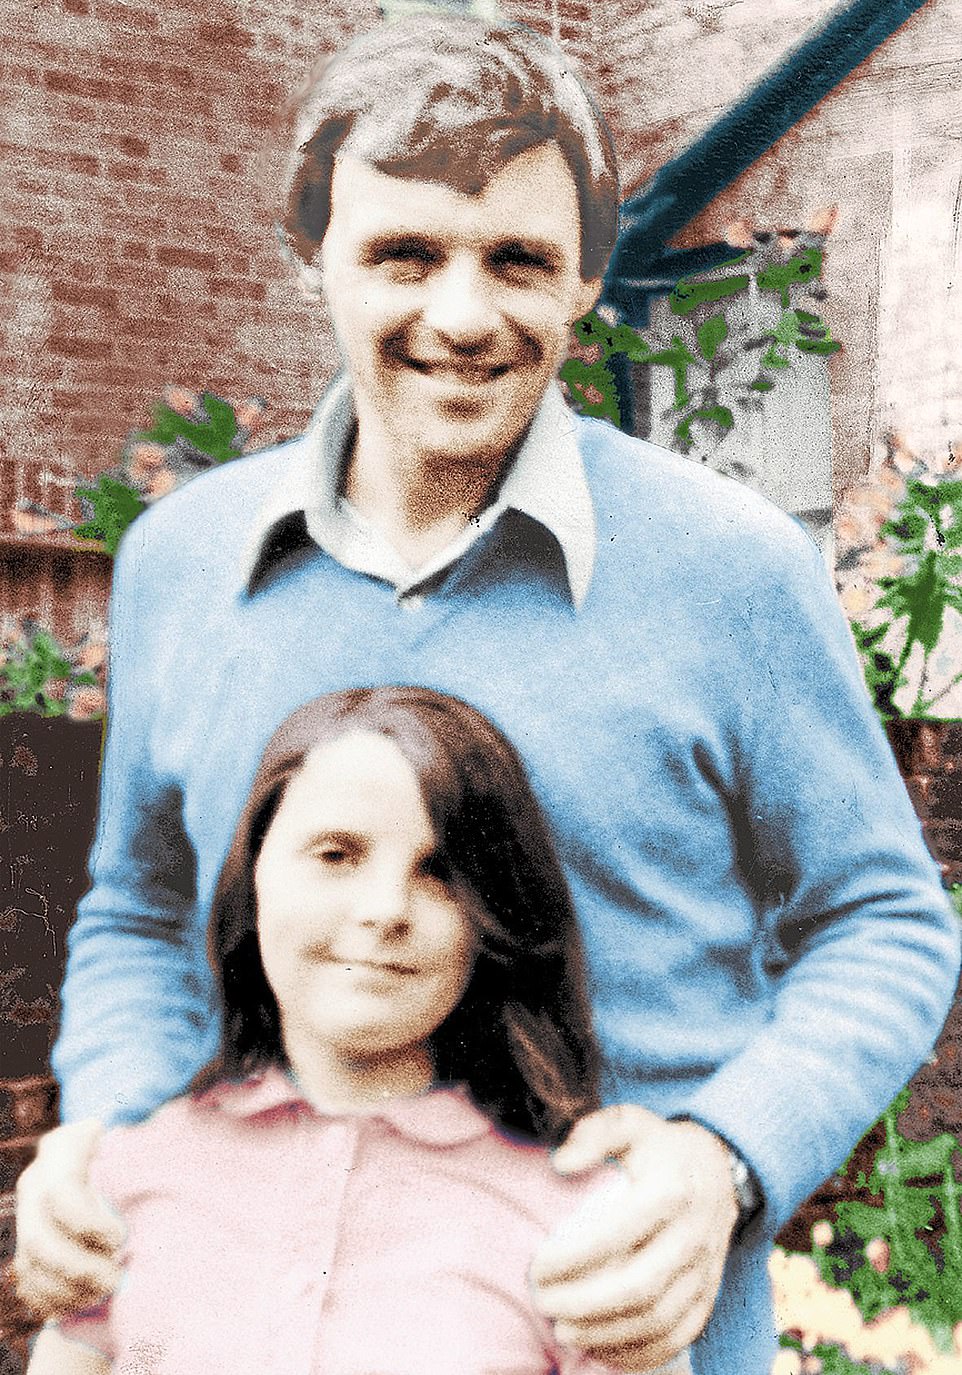 Hopkins and his daughter Abigail in the 1970s. The existence of a daughter will doubtless come as a surprise to most of the actor’s fans, including his 2.4 million Instagram followers